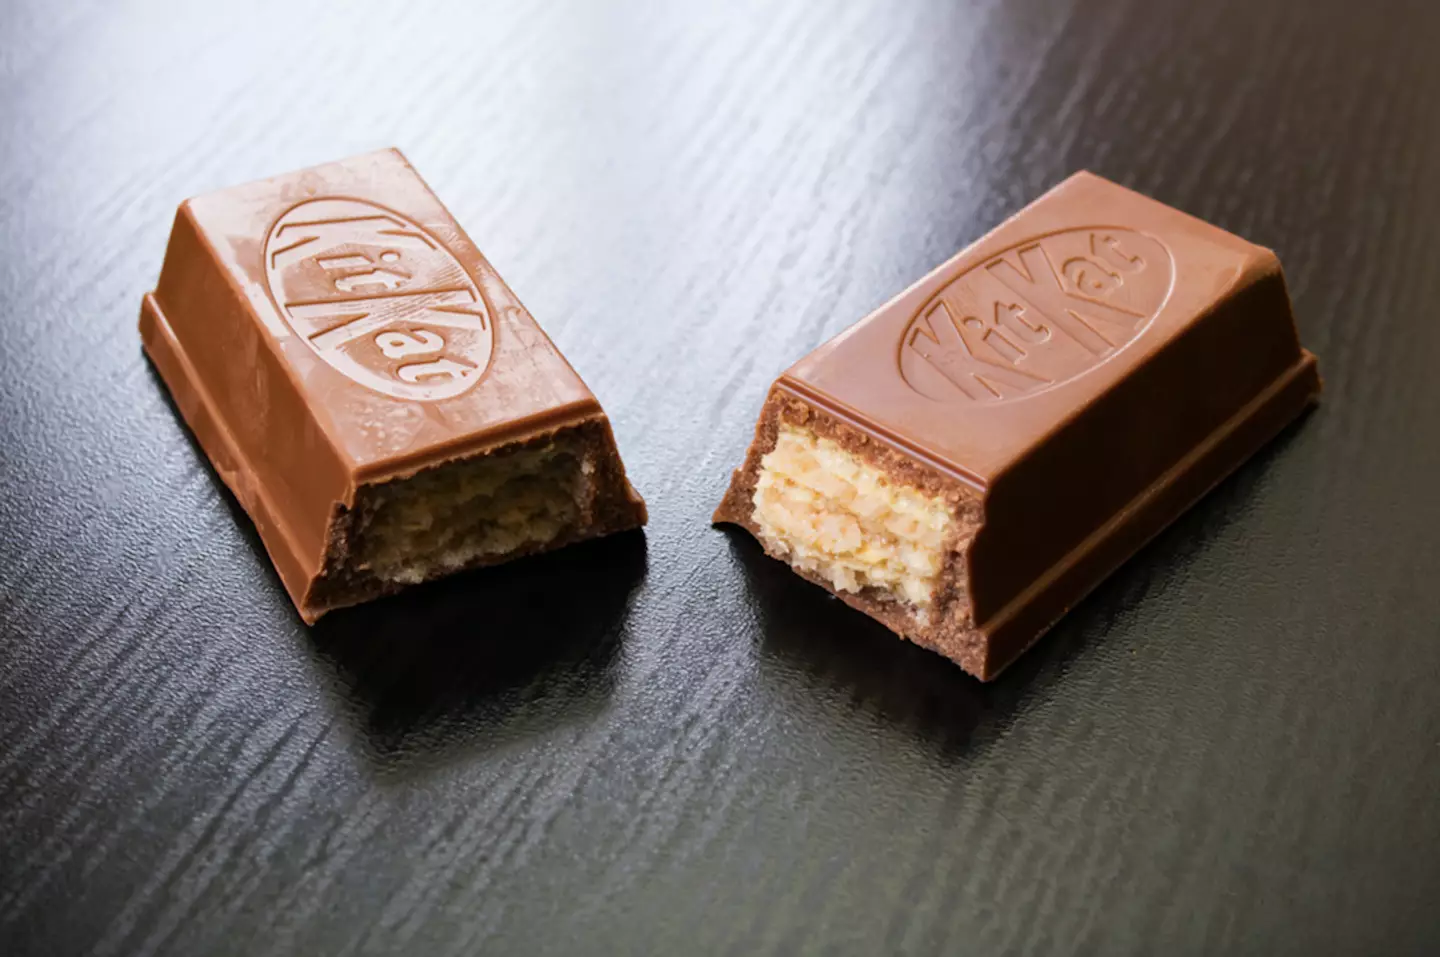 The new KitKat chunky is out in August (